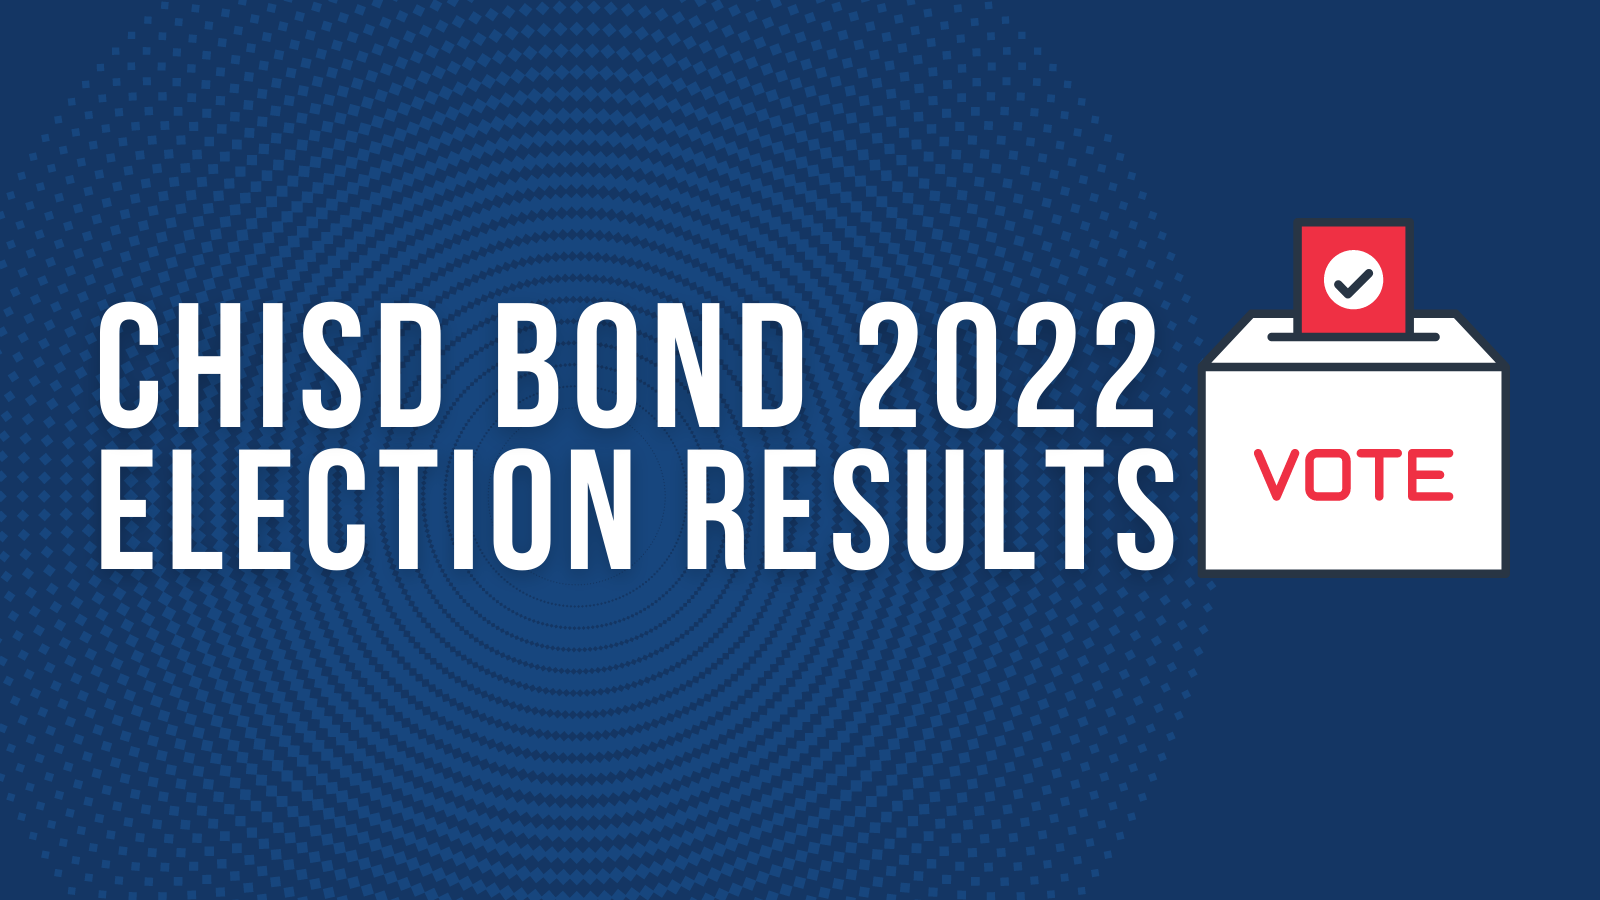 CHISD Bond 2022 Election Results